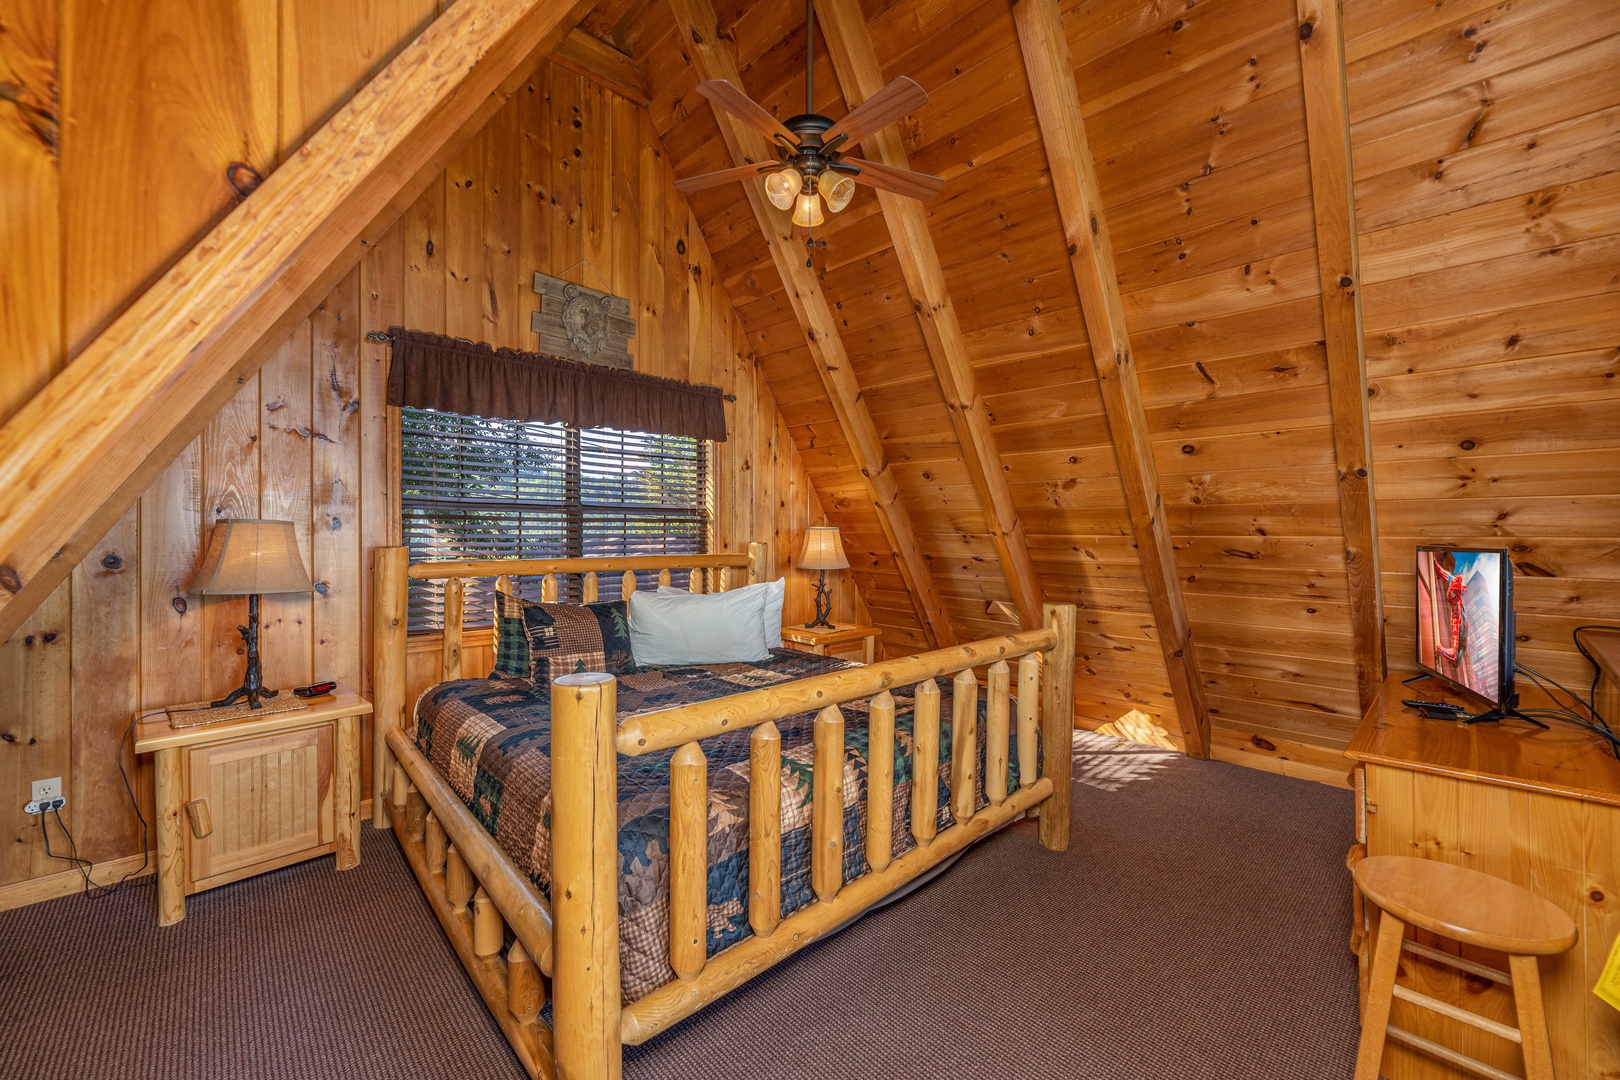 Loft floor king room at Cozy Mountain View, a 1 bedroom cabin rental located in Pigeon Forge